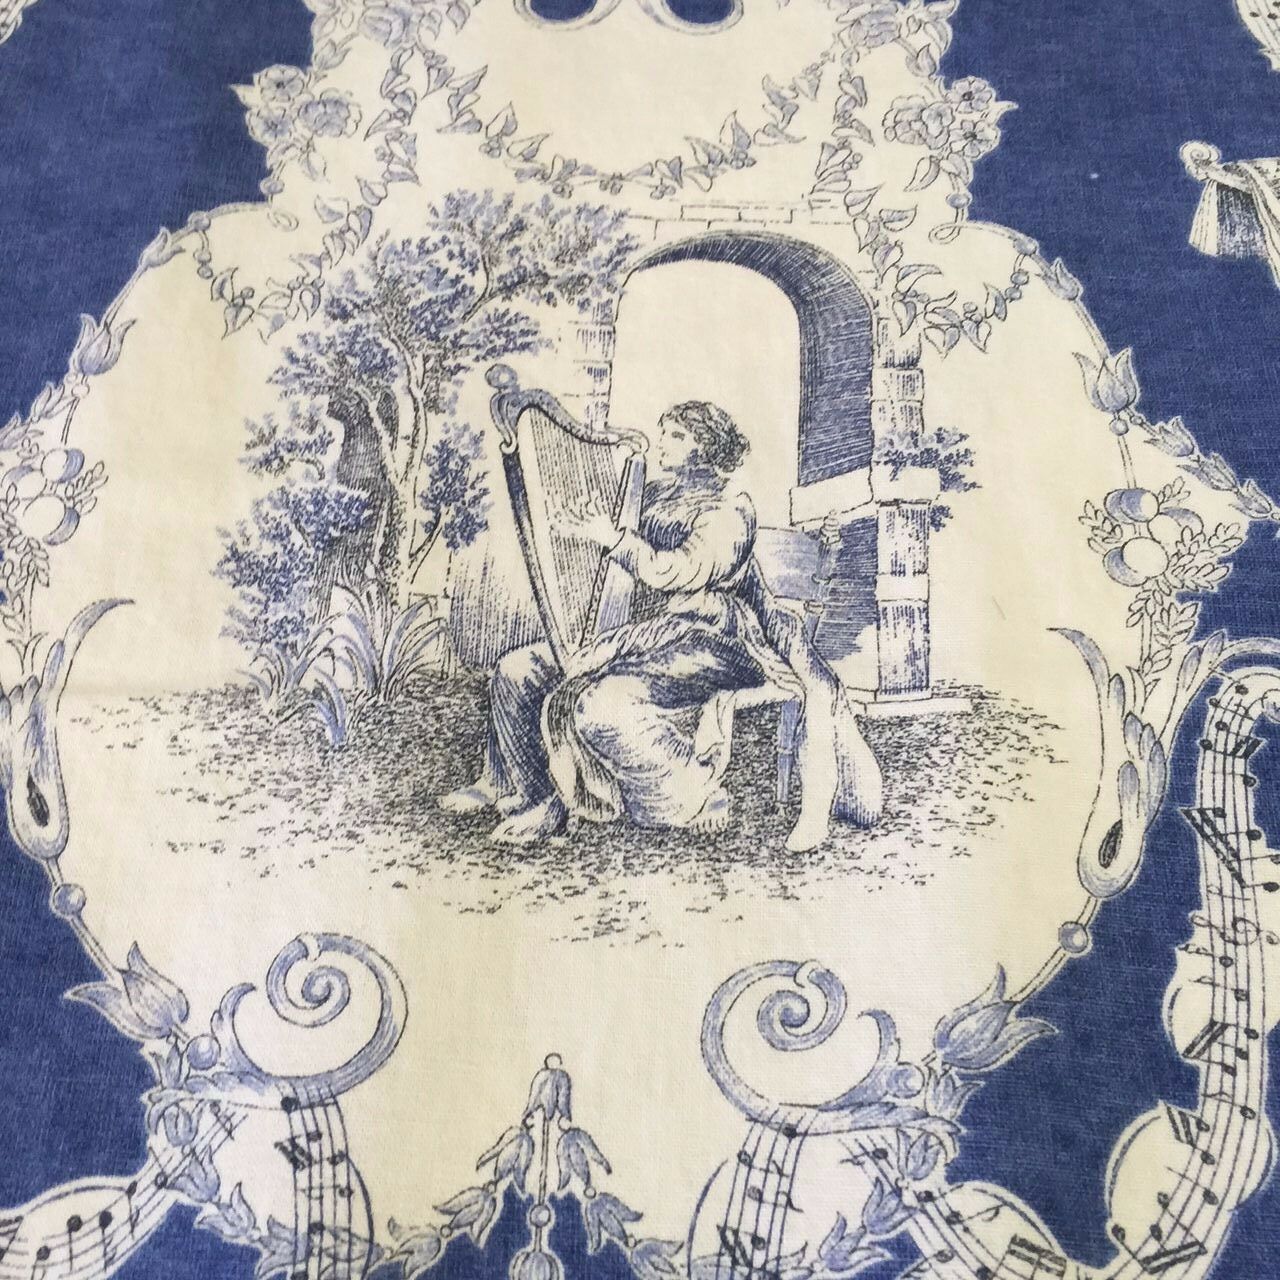 Les trois muses french toile cotton music motif print xwide fabric by ...